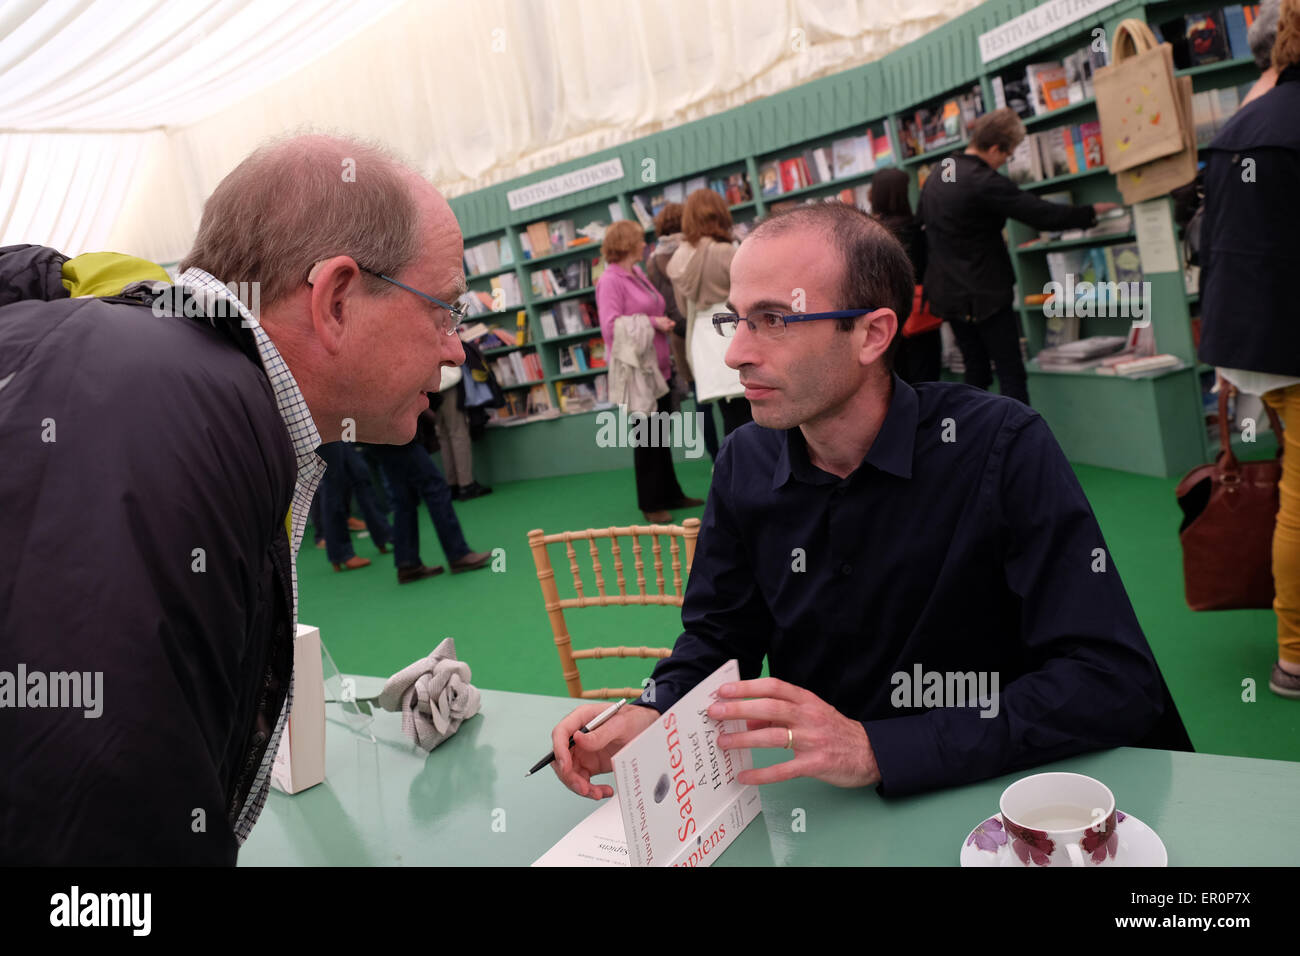 Powys, Wales, UK May 2015 Author Yuval Noah Harari in the Festival bookshop signing copies of his latest book Sapiens - A Brief History of Humankind. Stock Photo